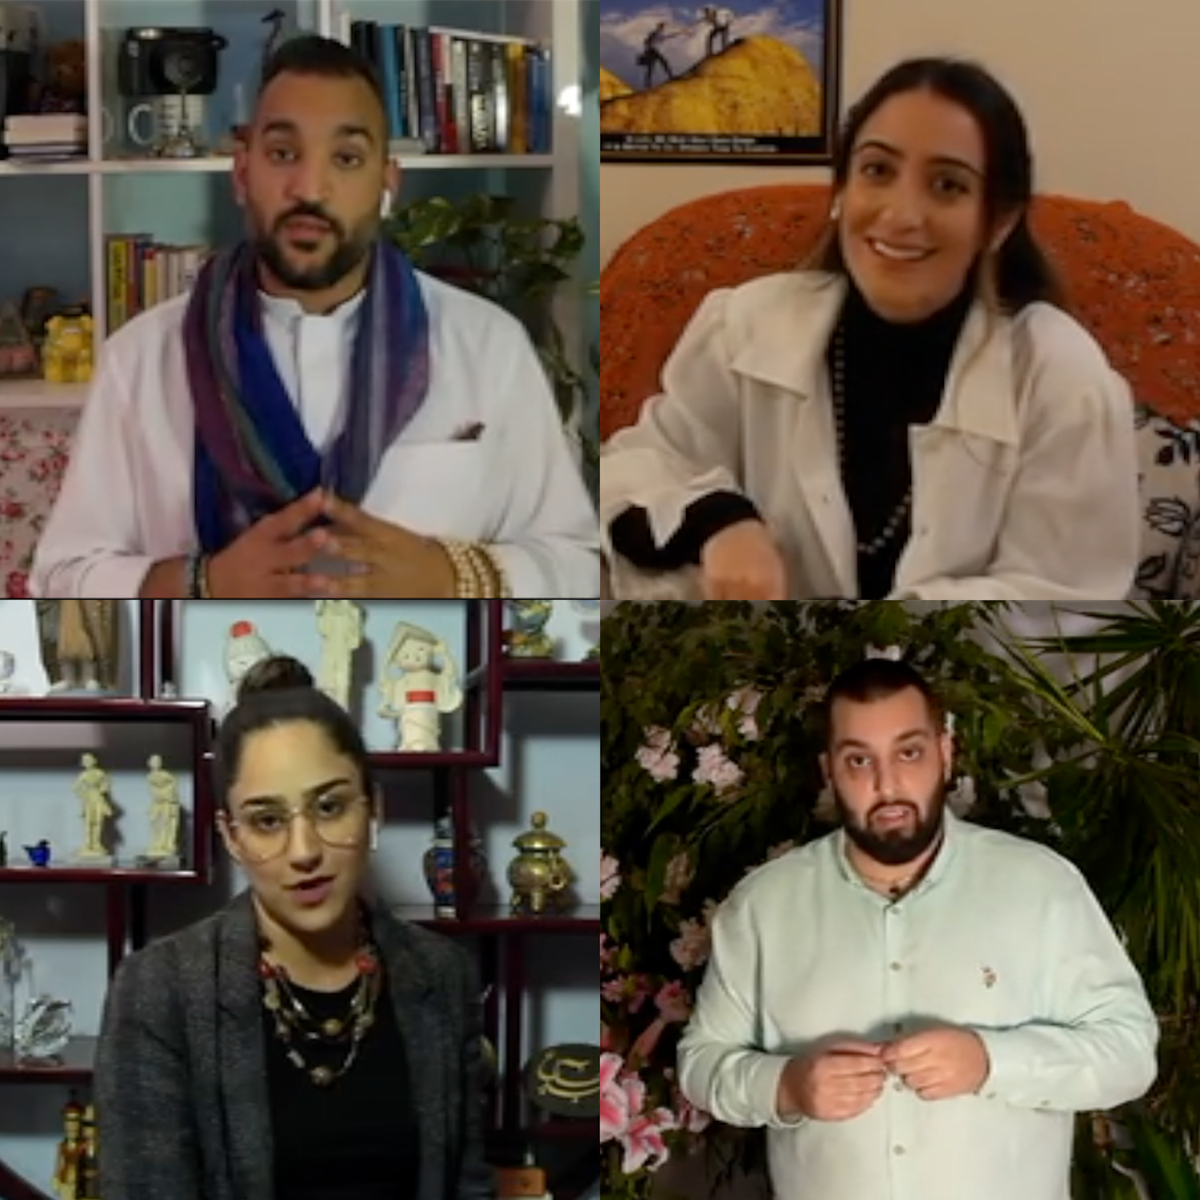 A group of youth in Kuwait marked Naw-Ruz by creating a short video exploring how the Holy Day has been a unifying event across several religions and cultures.